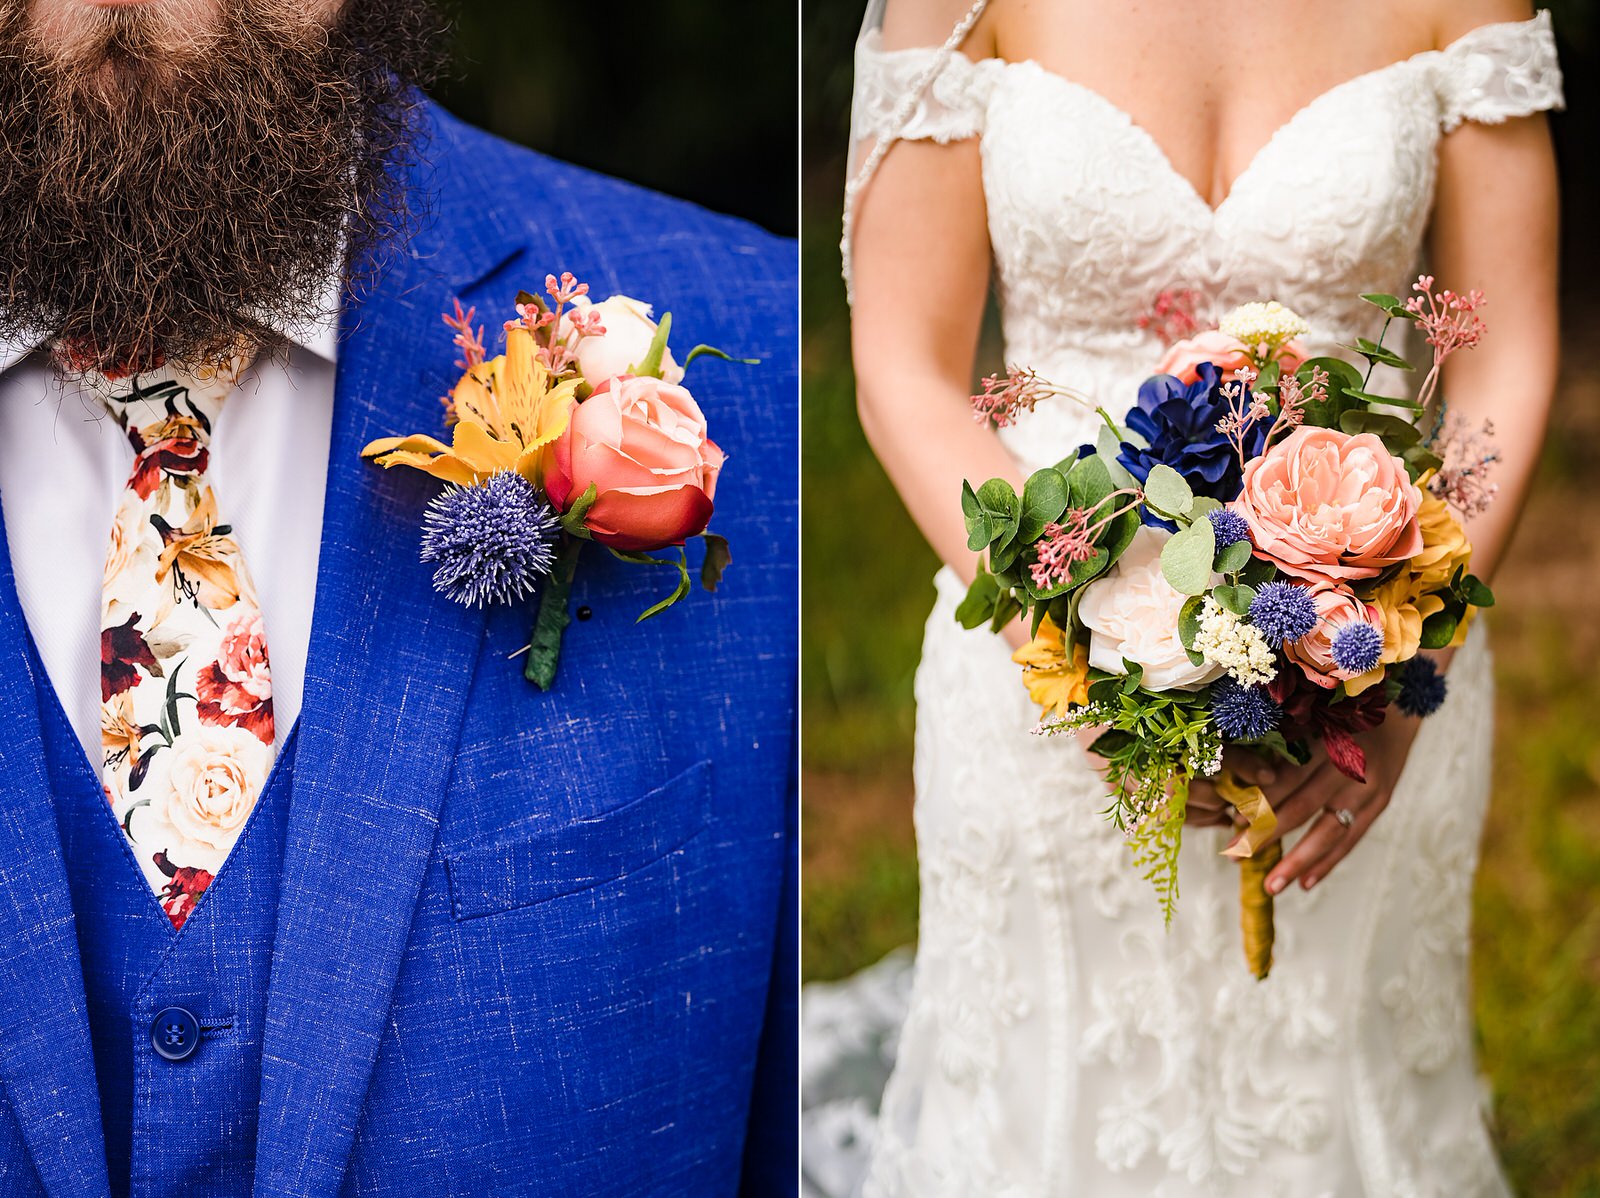 Details of this couples wedding florals - colorful silk florals for your wedding day